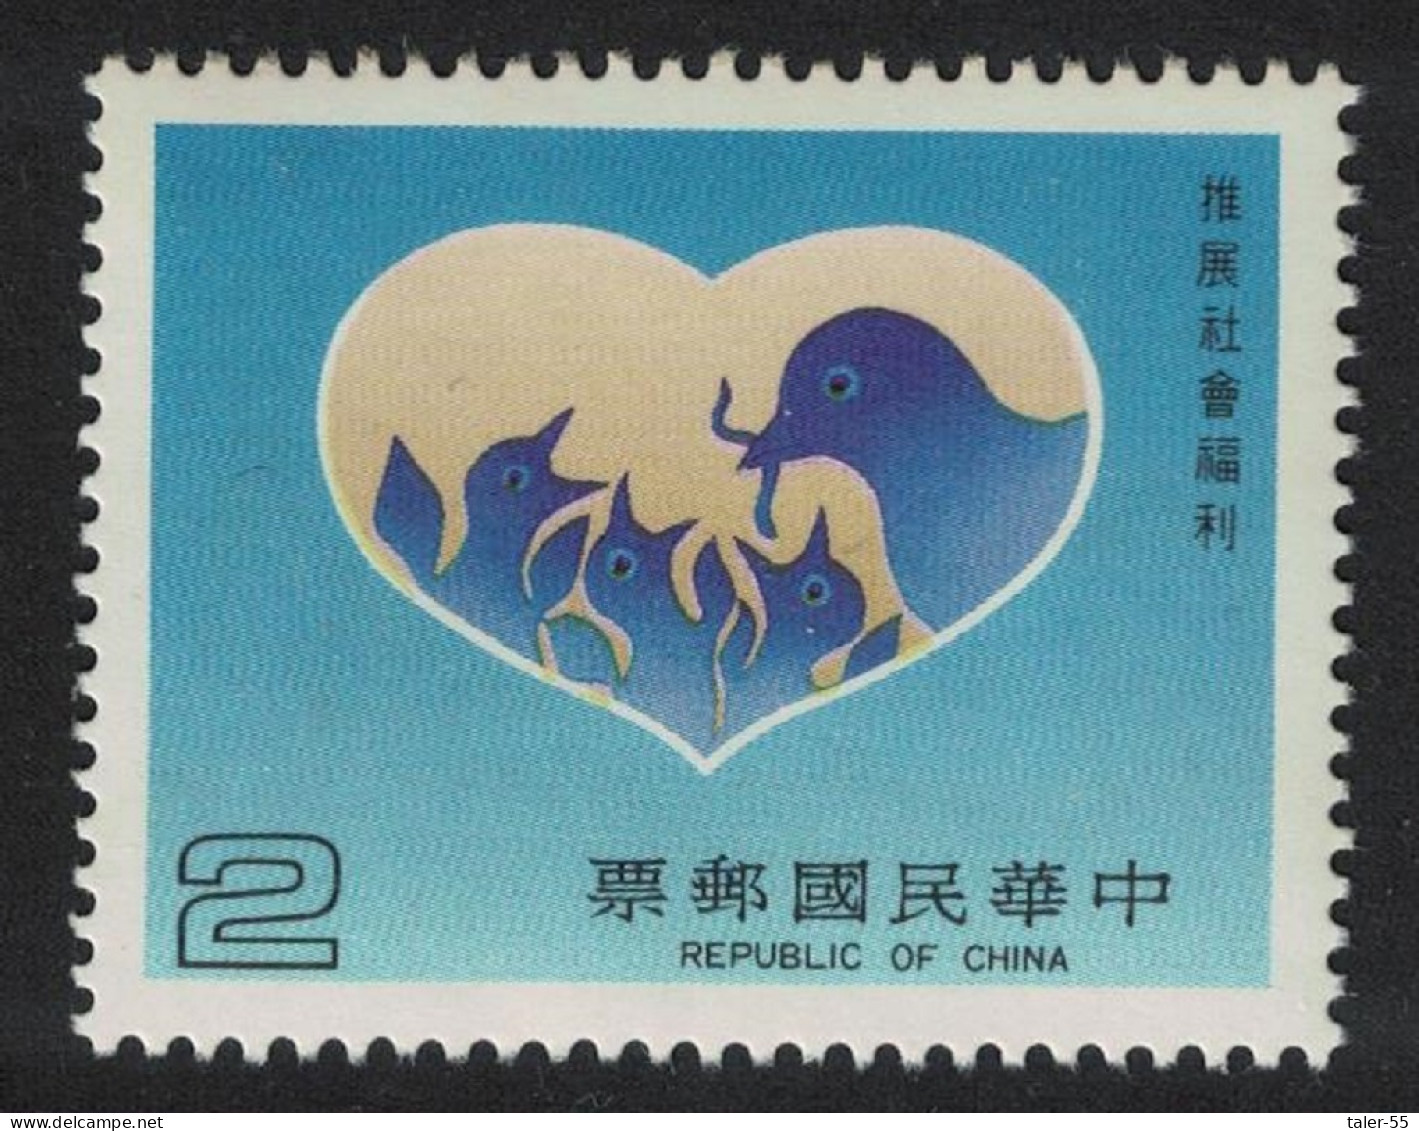 Taiwan Bird With Chicks Social Welfare 1985 MNH SG#1610 - Unused Stamps